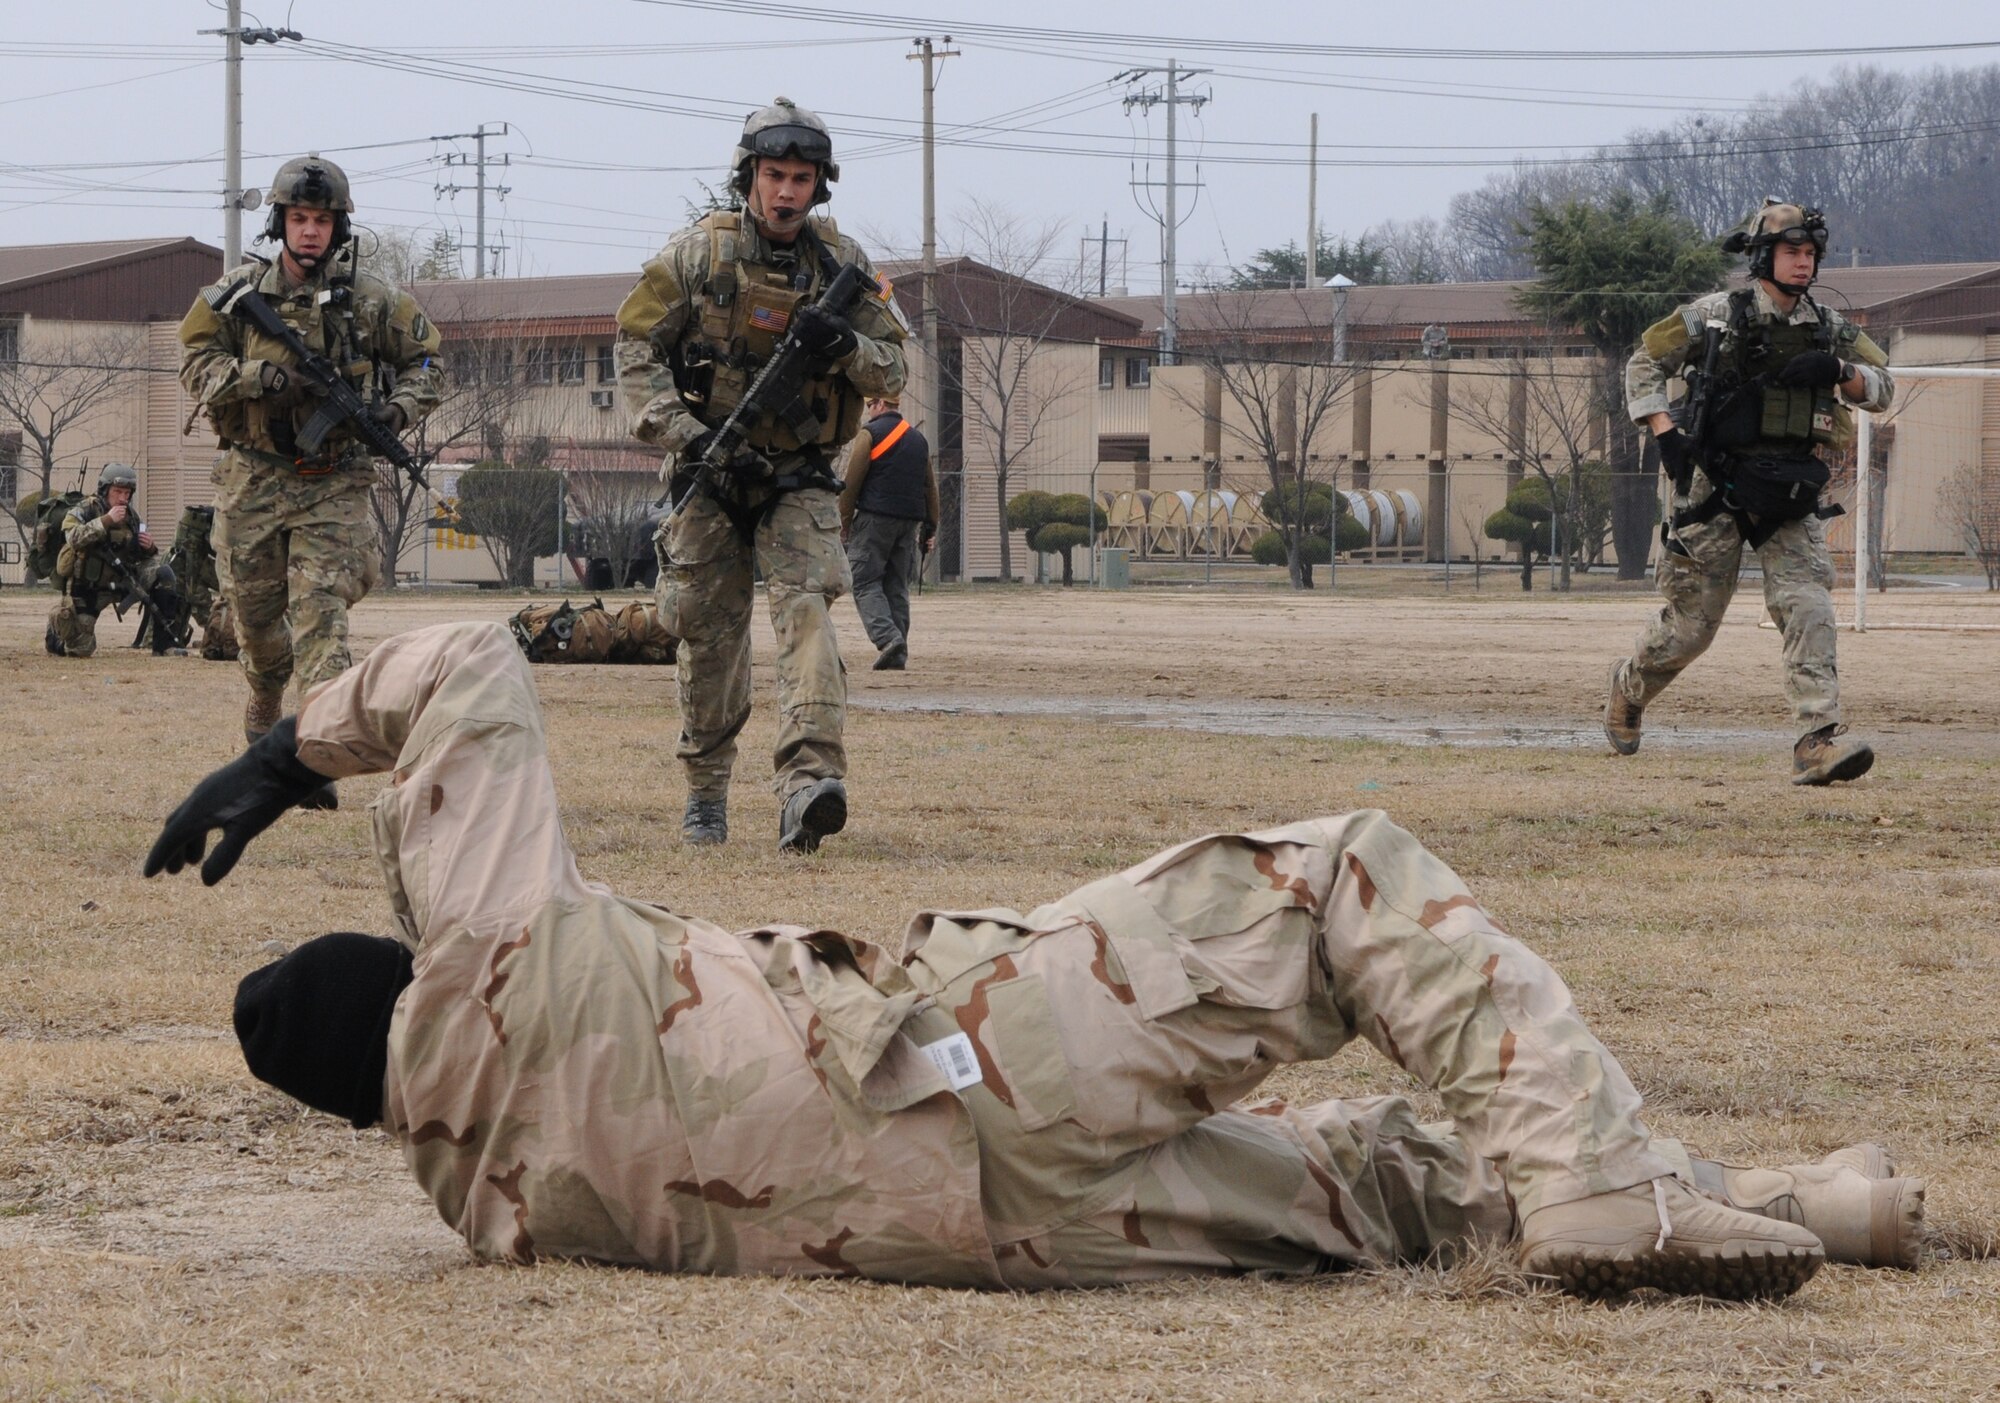 DAEGU AIR BASE, Republic of Korea -- Pararescuemen and a combat controller from the 320th Special Tactics Squadron approach a simulated wounded soldier during a mass casualty exercise here March 27. The scenario is part of the 353rd Special Operations Group’s annual operational readiness exercise. (U.S. Air Force photo by Tech. Sgt. Aaron Cram)